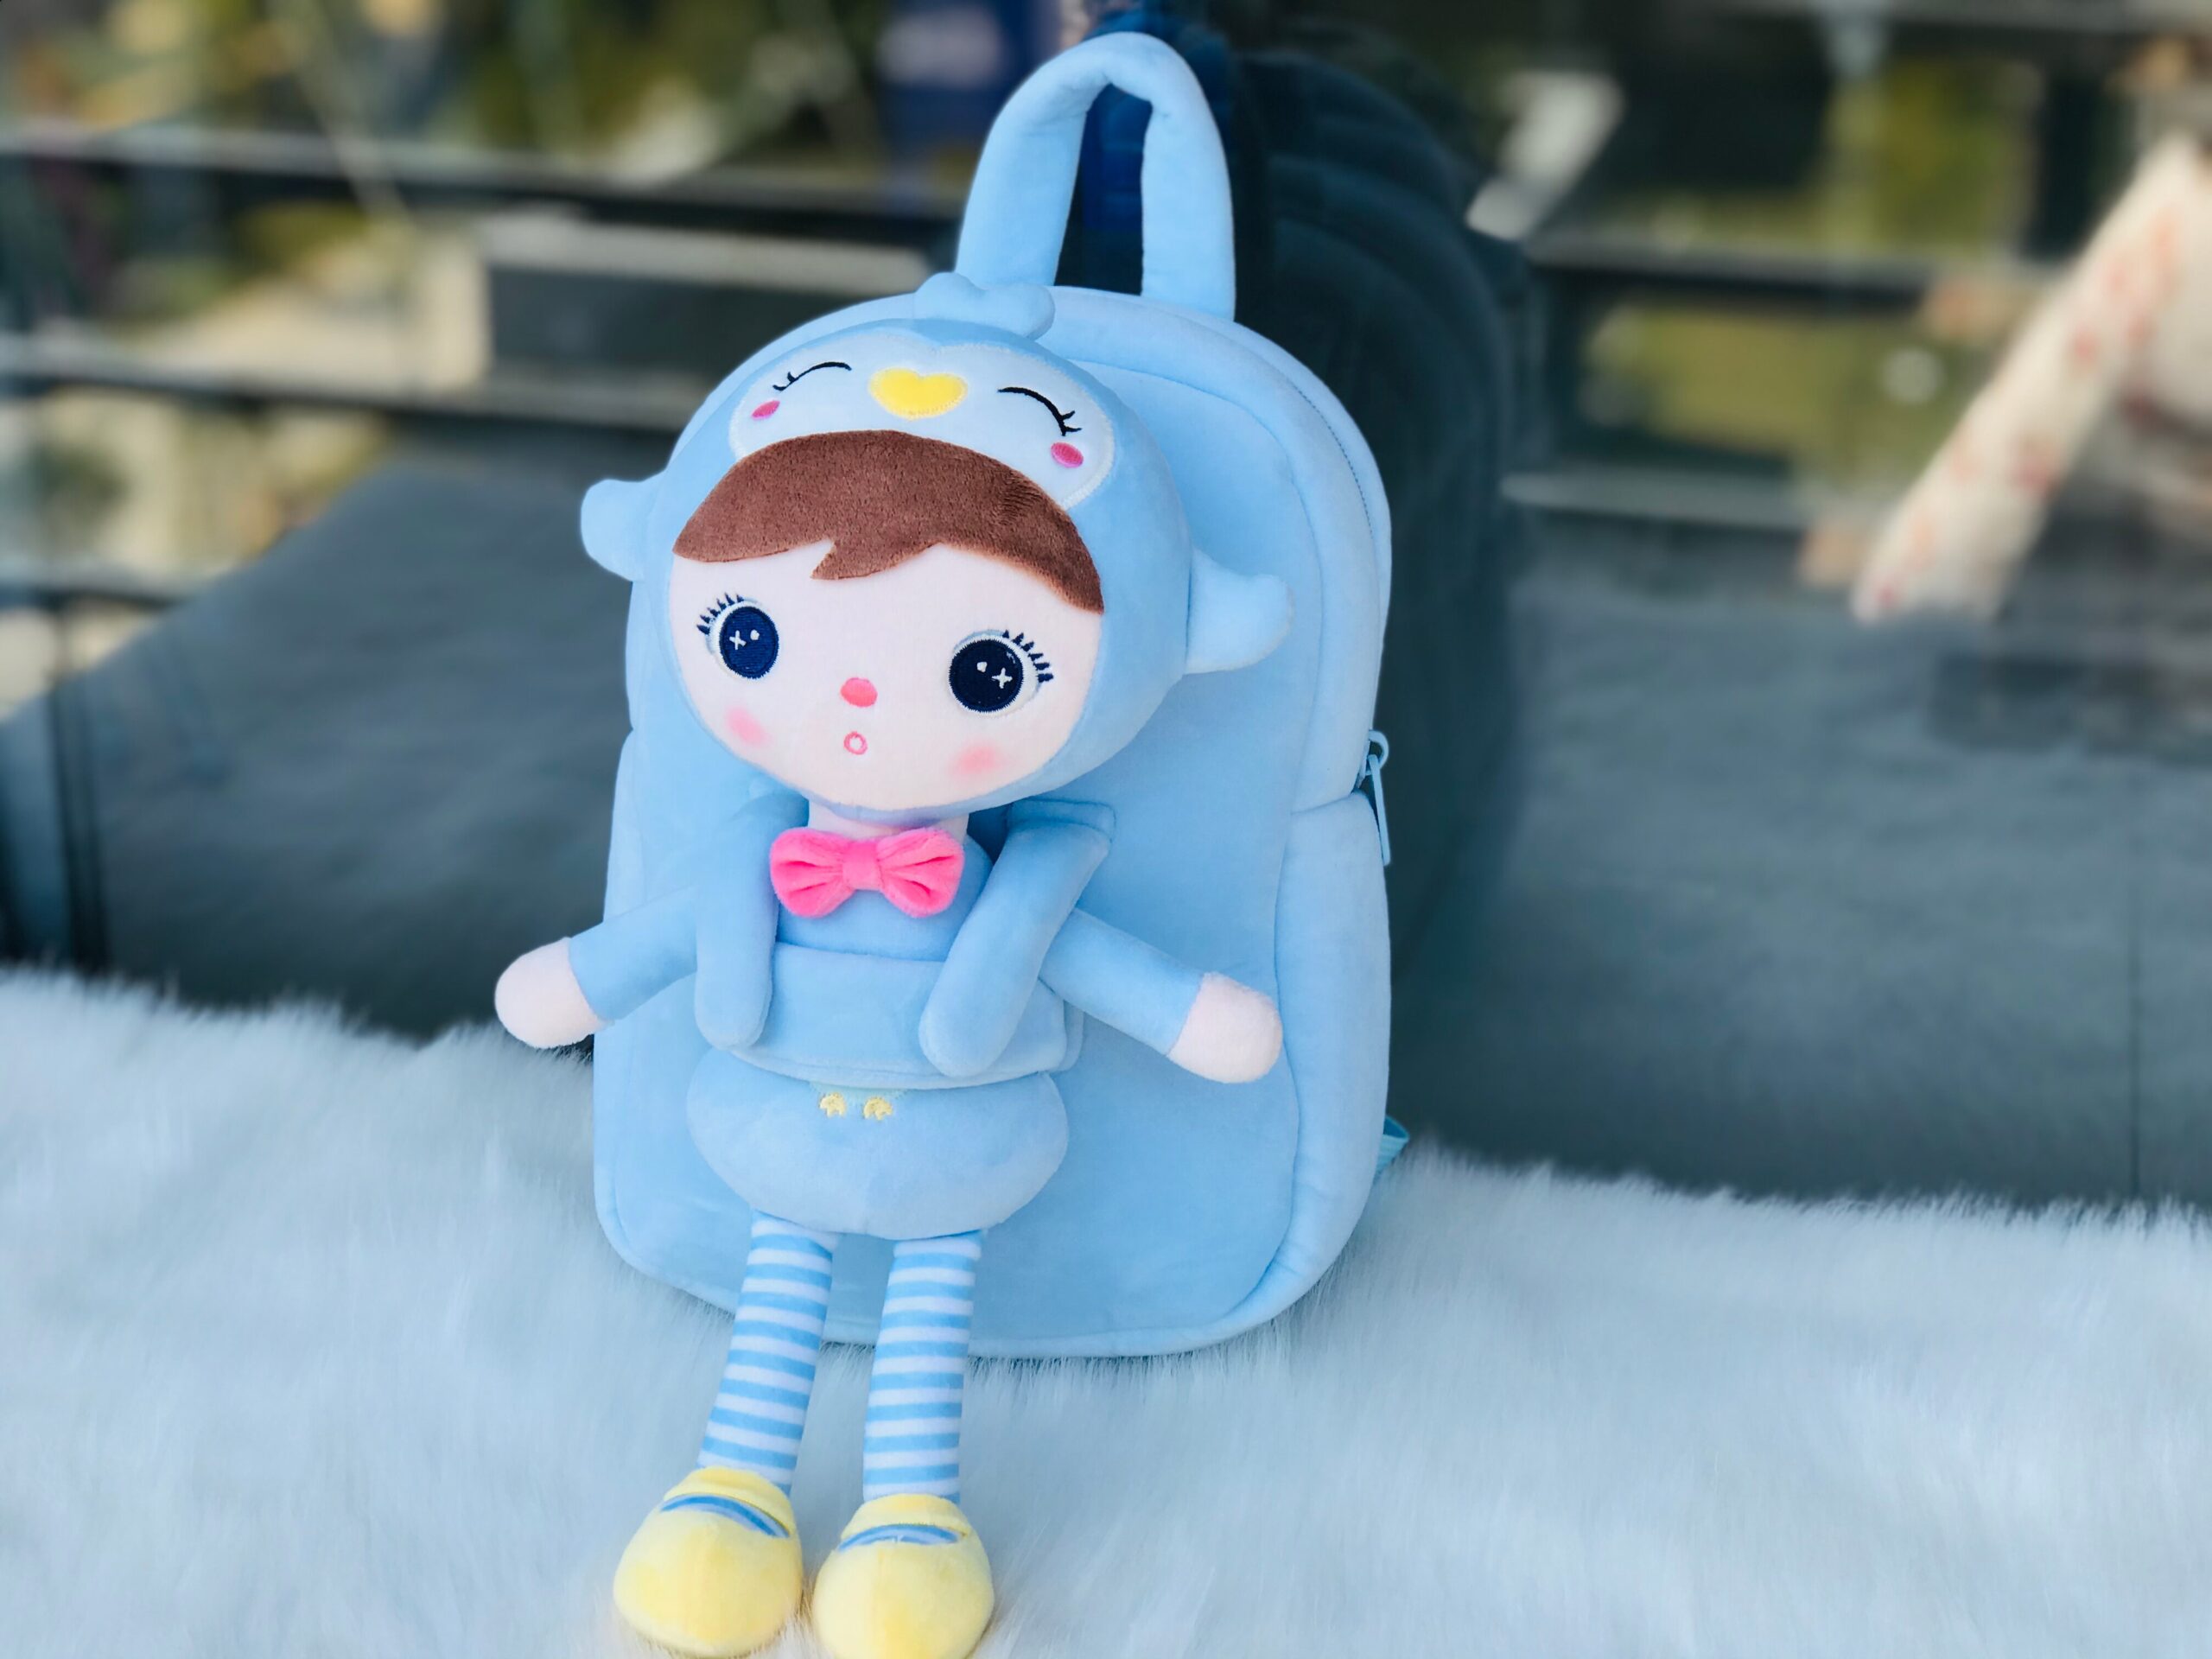 Gloveleya Plush Backpack Keppel Backpacks with dolls Animal Cartoon Bags Baby Gifts Plush Dolls Stuffed Toys for Children First